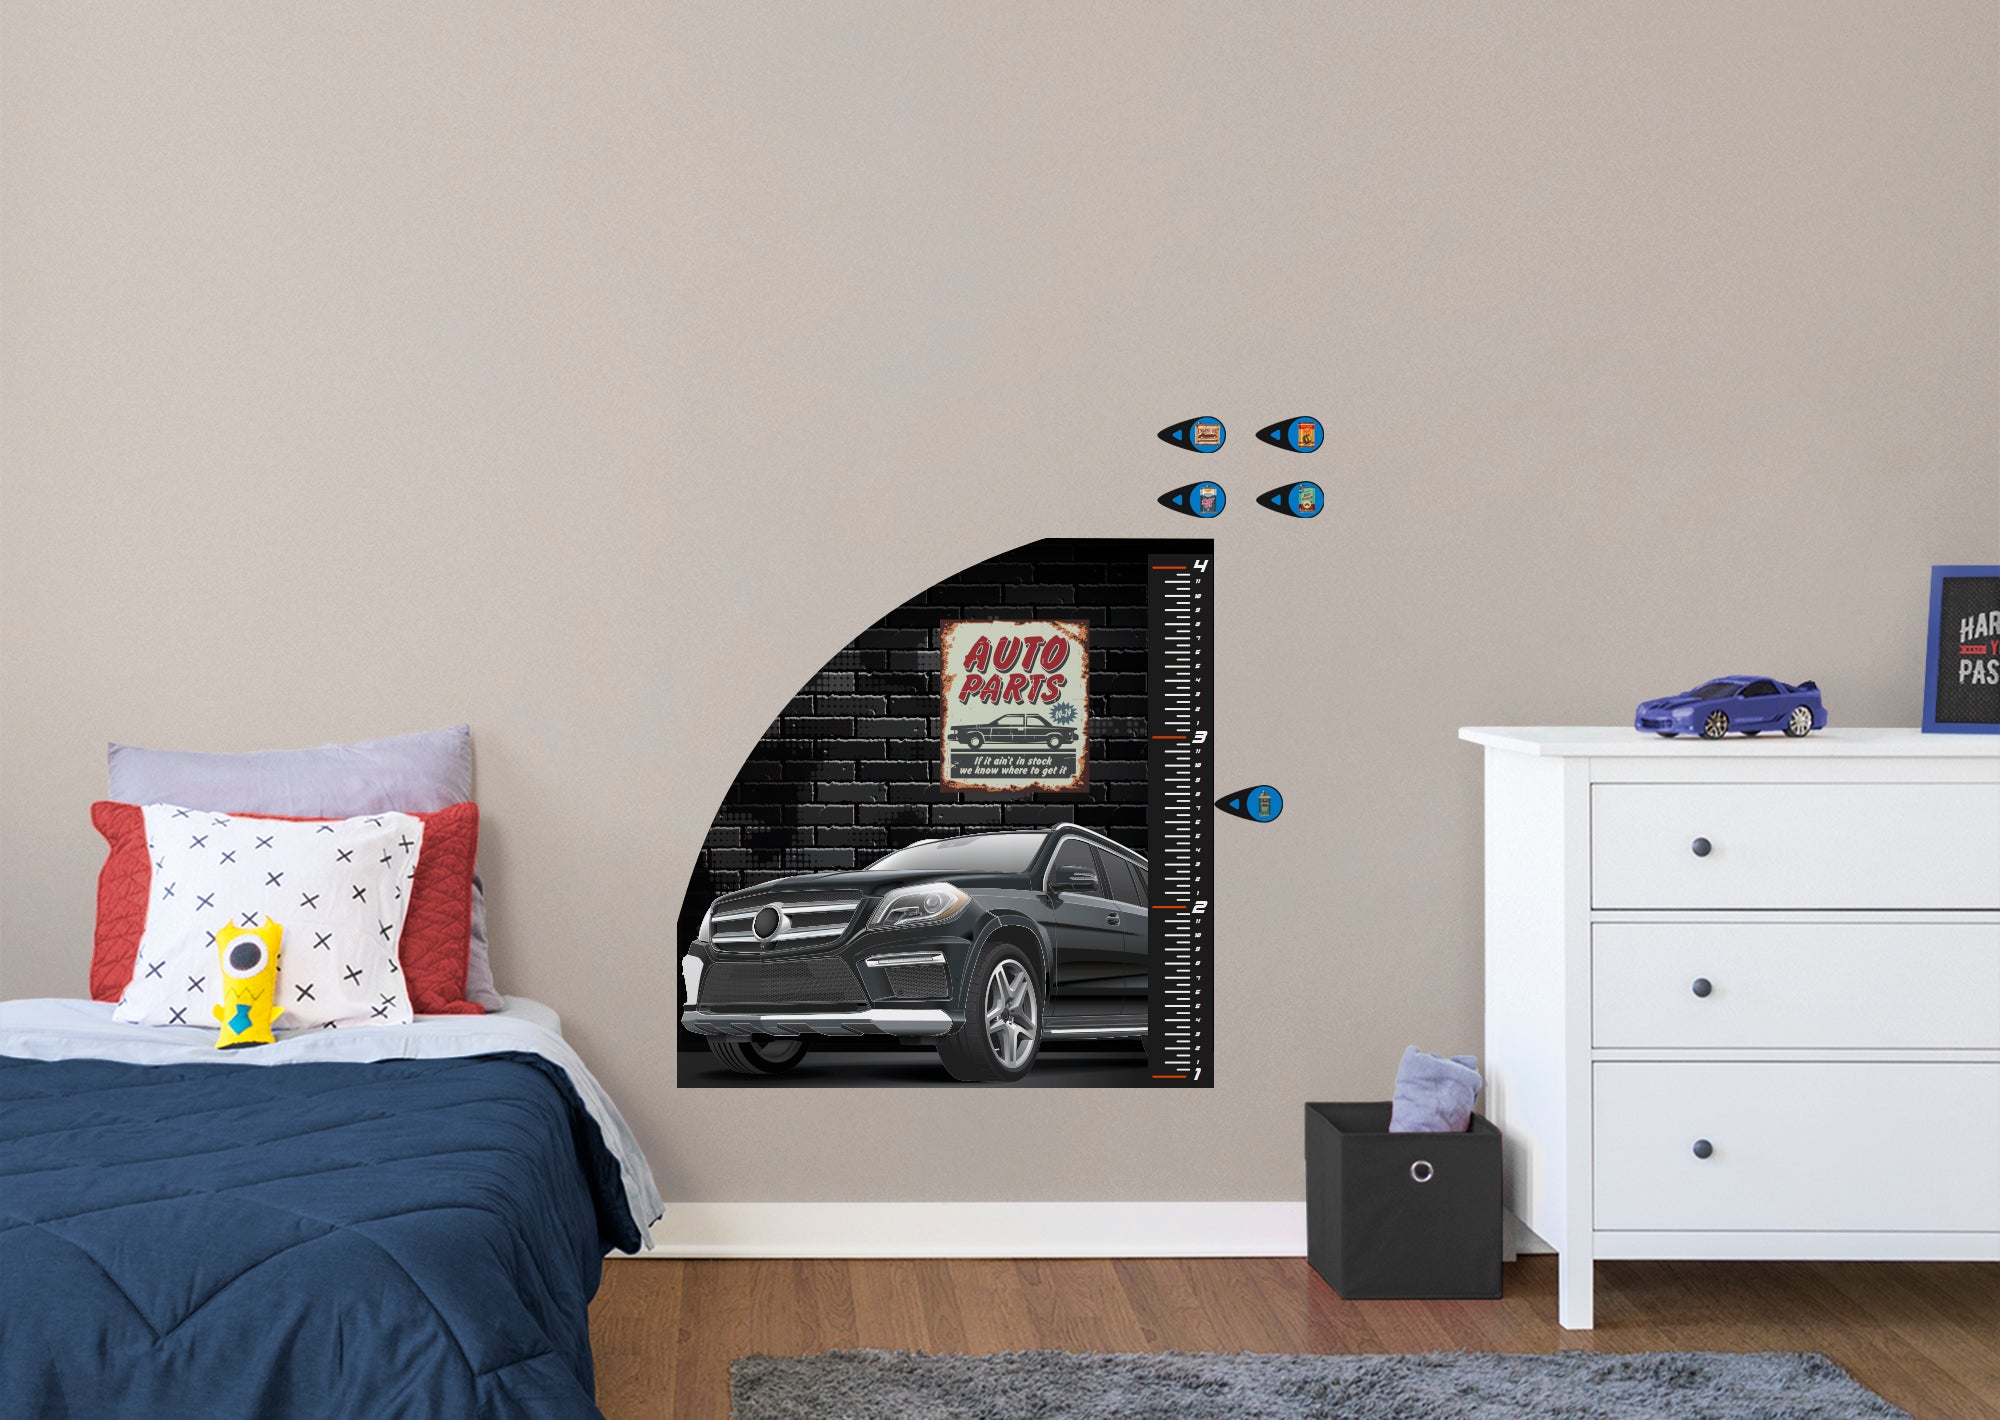 Automobile Growth Charts SUV Car - Removable Wall Decal Growth Chart (38"W x 39"H) by Fathead | Vinyl